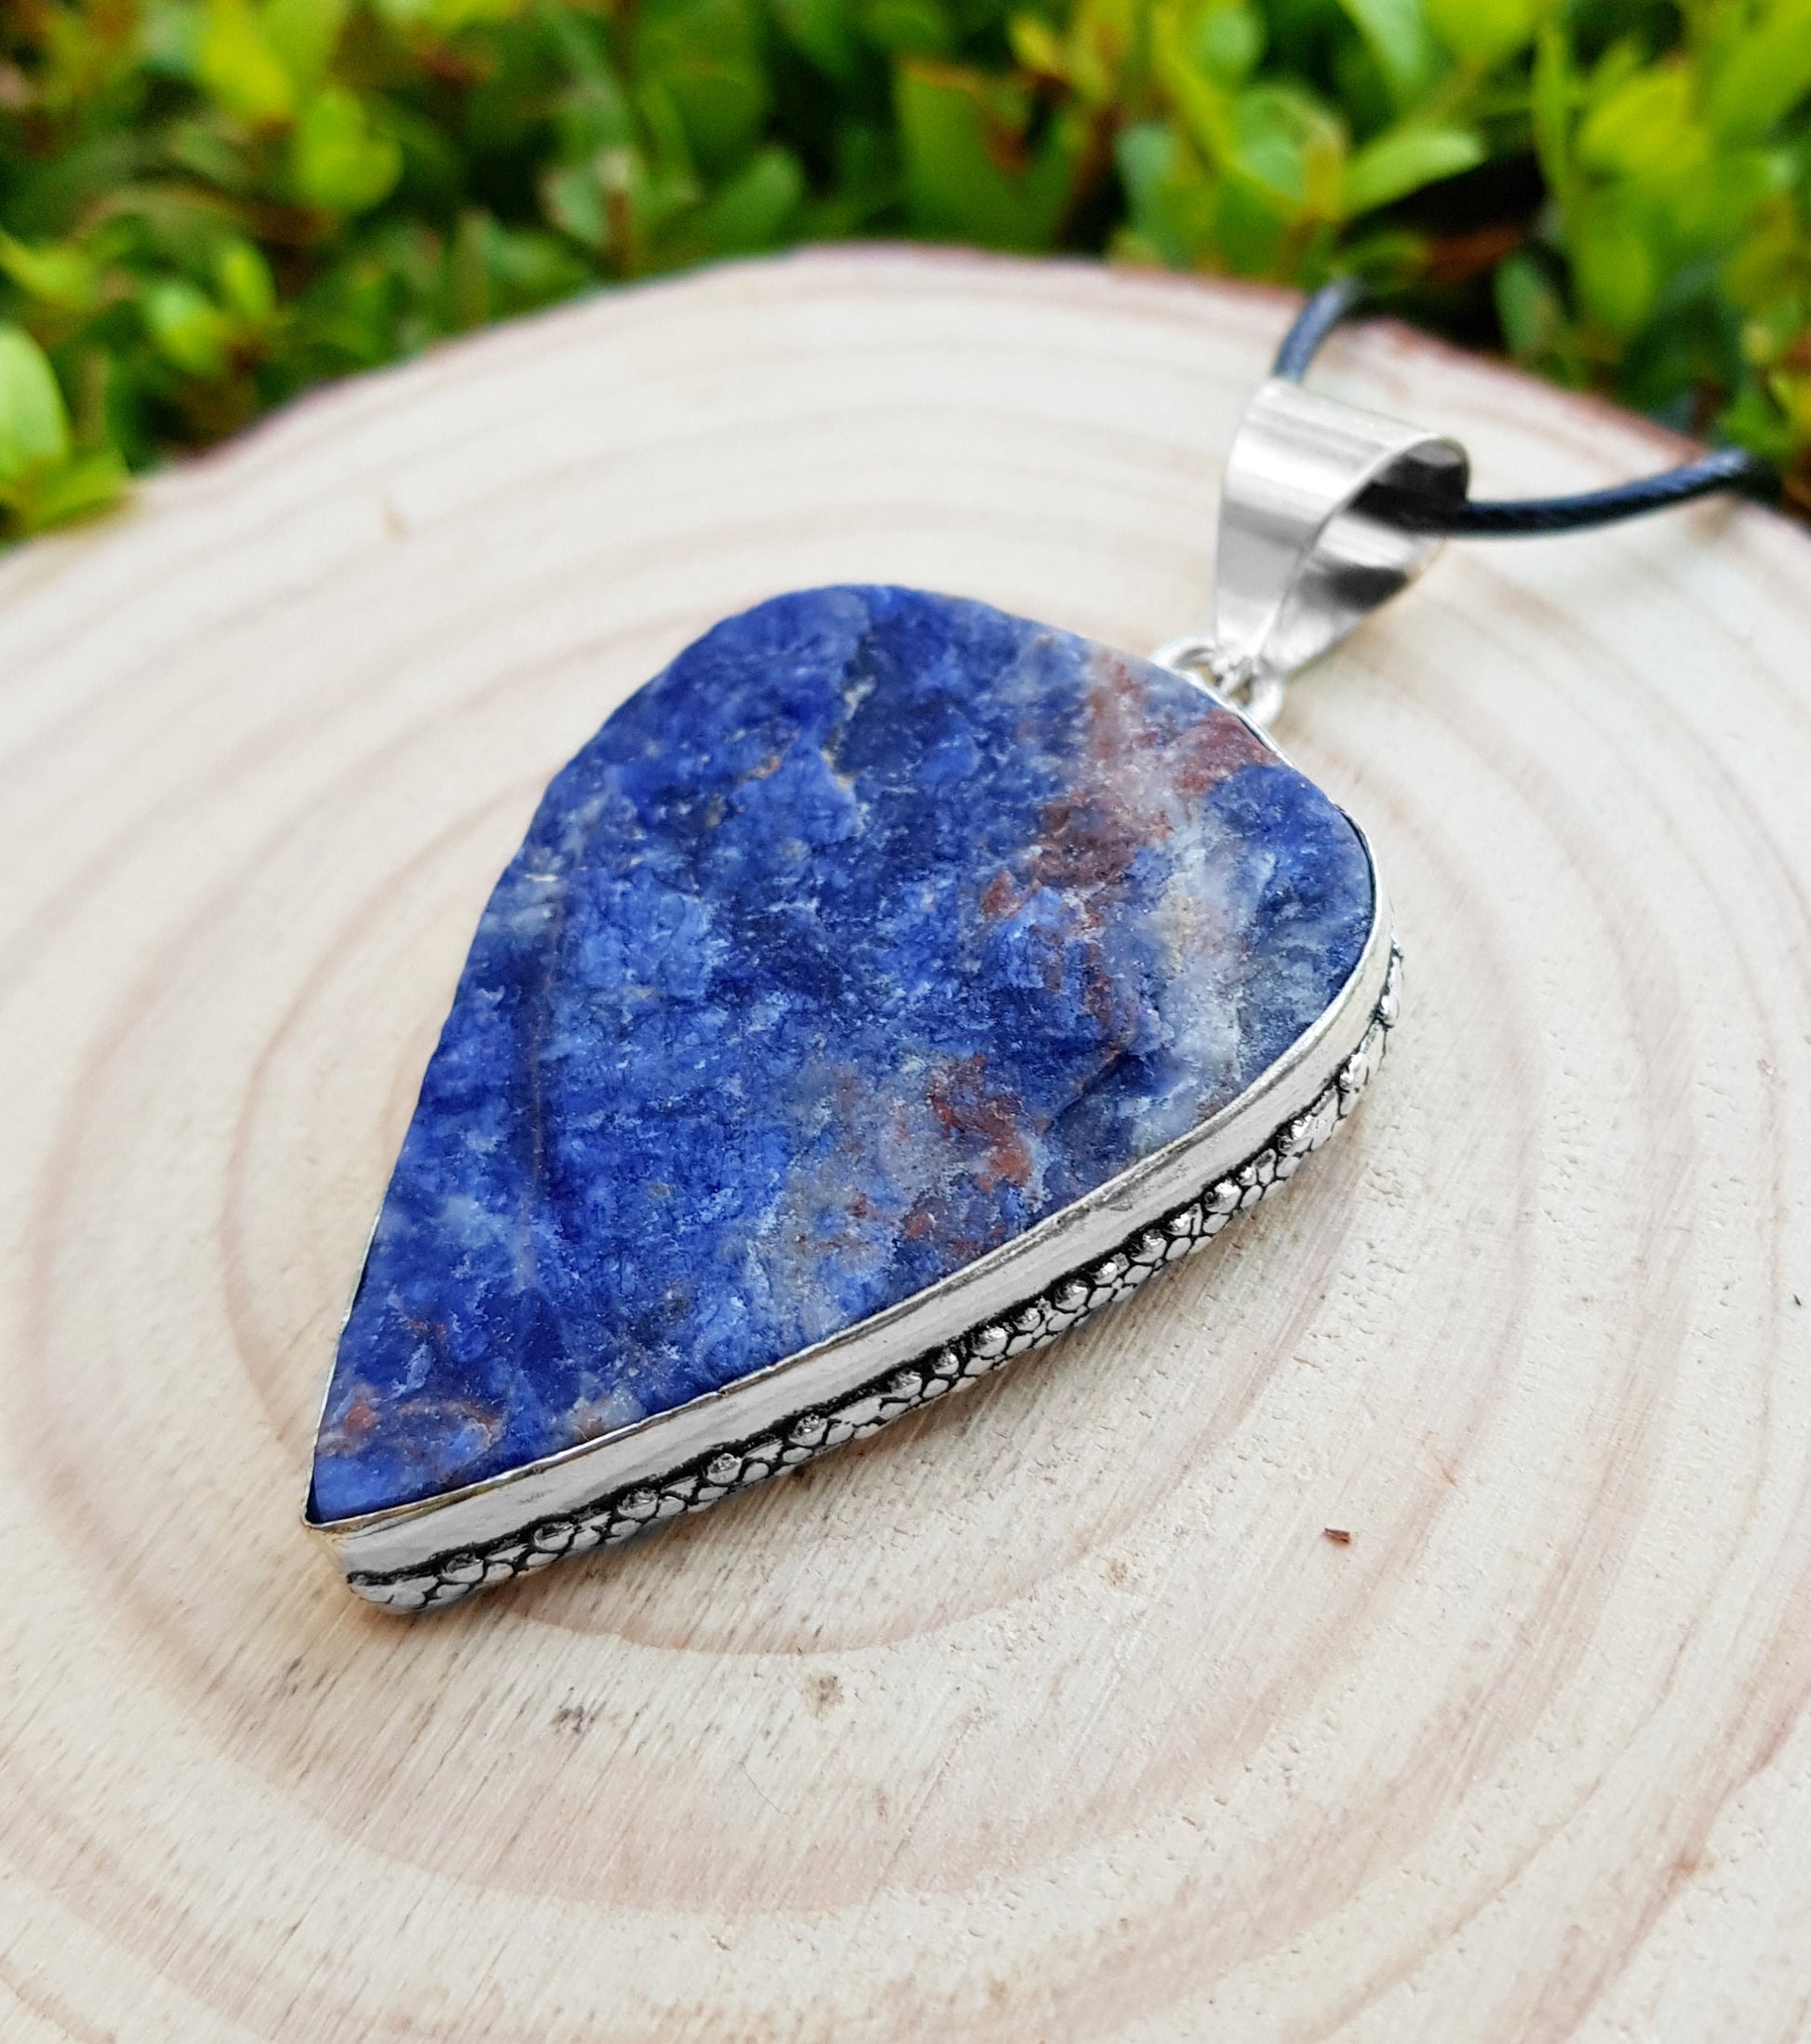 Sodalite Pendant In Sterling Silver Boho Crystal Necklace Unique Gift For Women GypsyJewelry